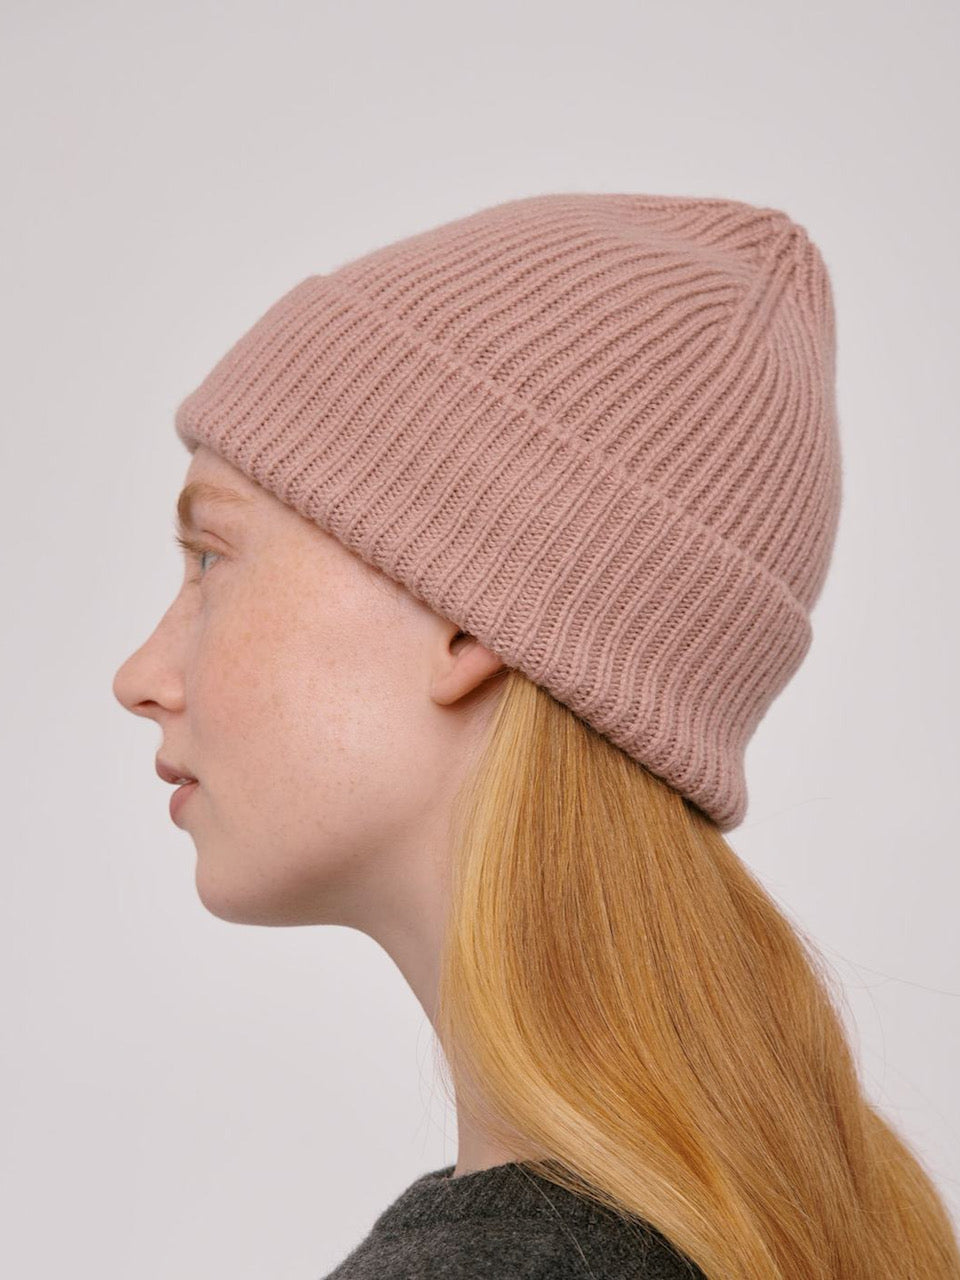 A woman wearing an Organic Basics Recycled Wool Beanie – Dusty Rose.